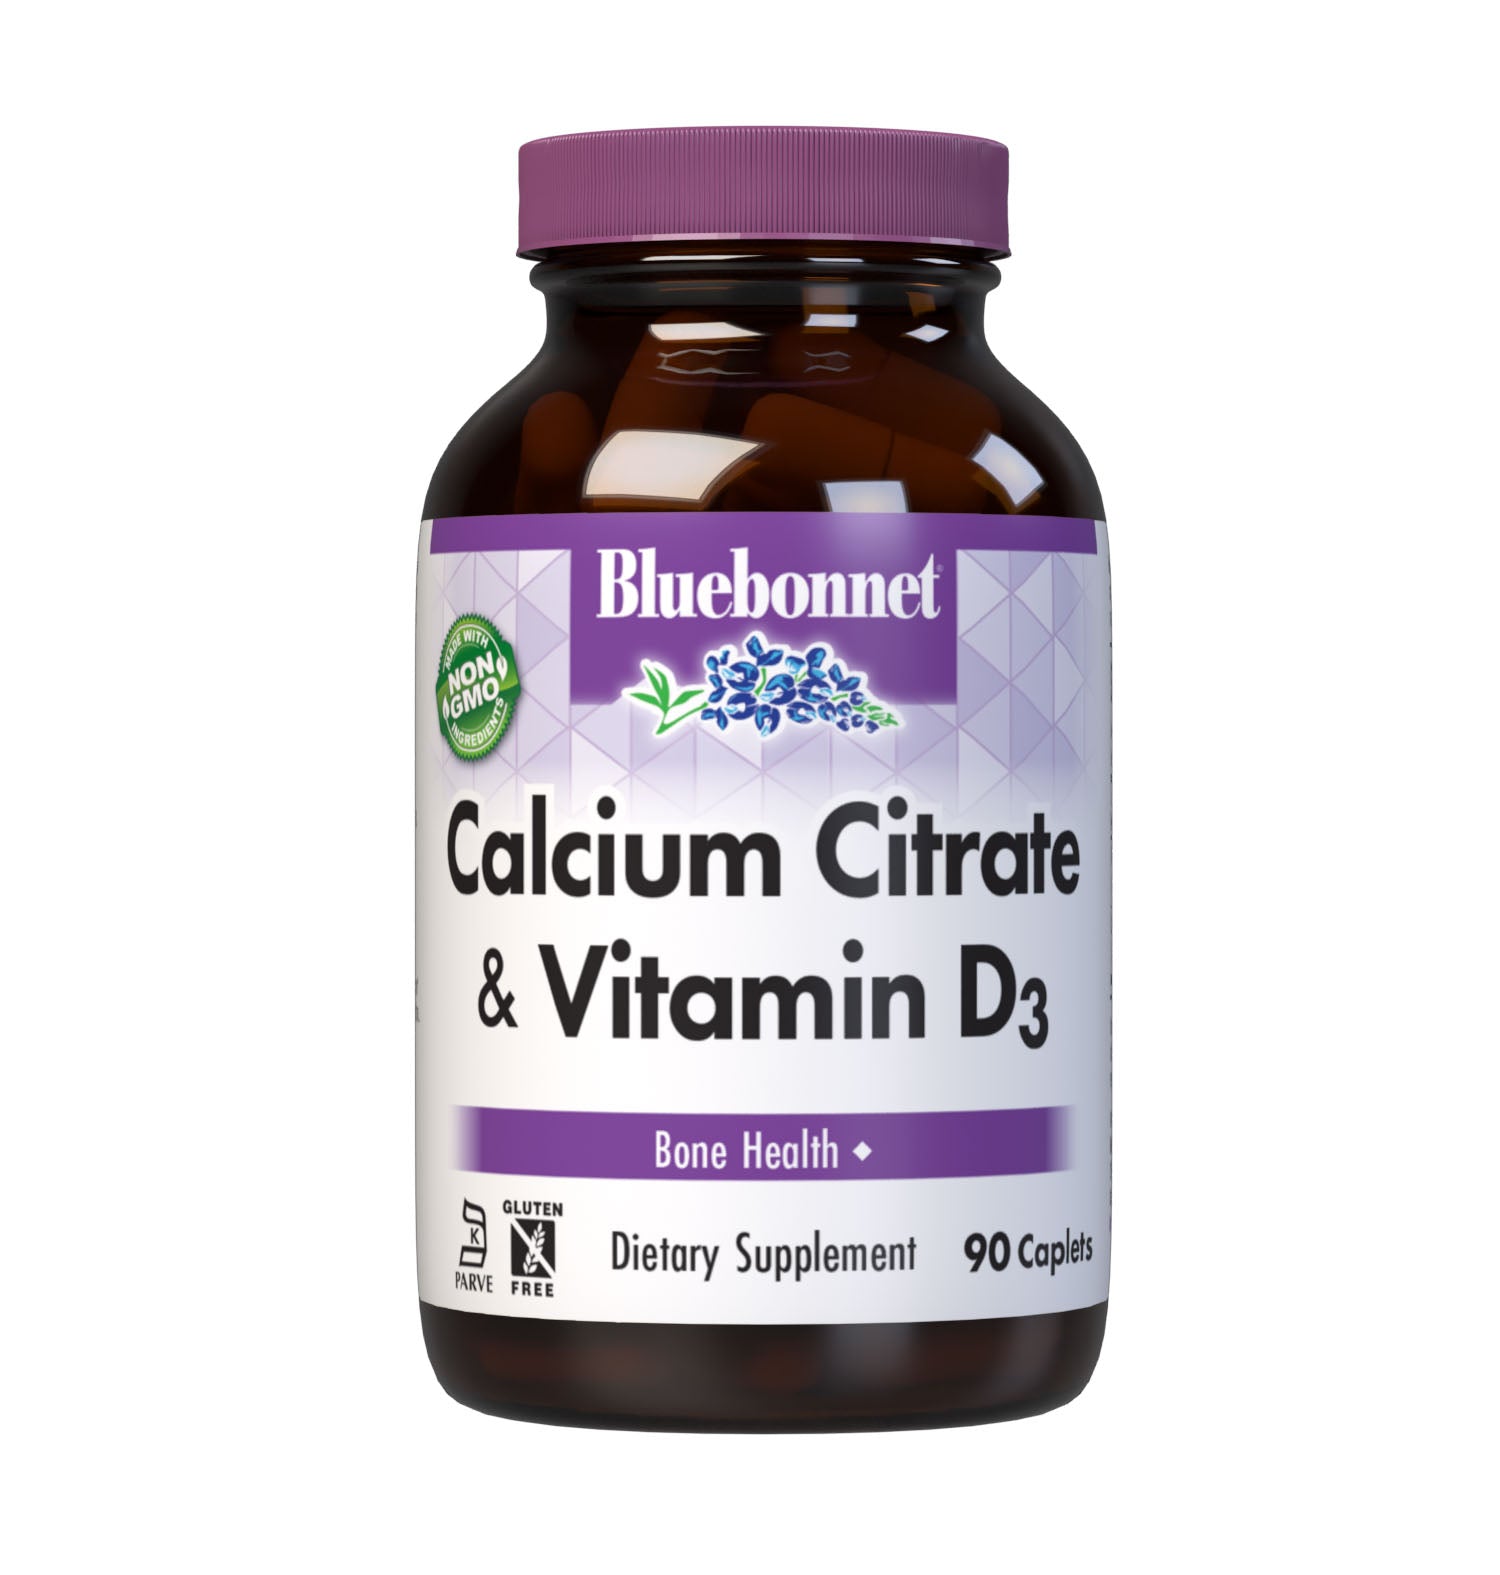 Bluebonnet's Calcium Citrate and Vitamin D3 90 Caplets are formulated with calcium in a chelate of calcium citrate and vitamin D3 (cholecalciferol) from lanolin for strong, healthy bones. #size_90 count